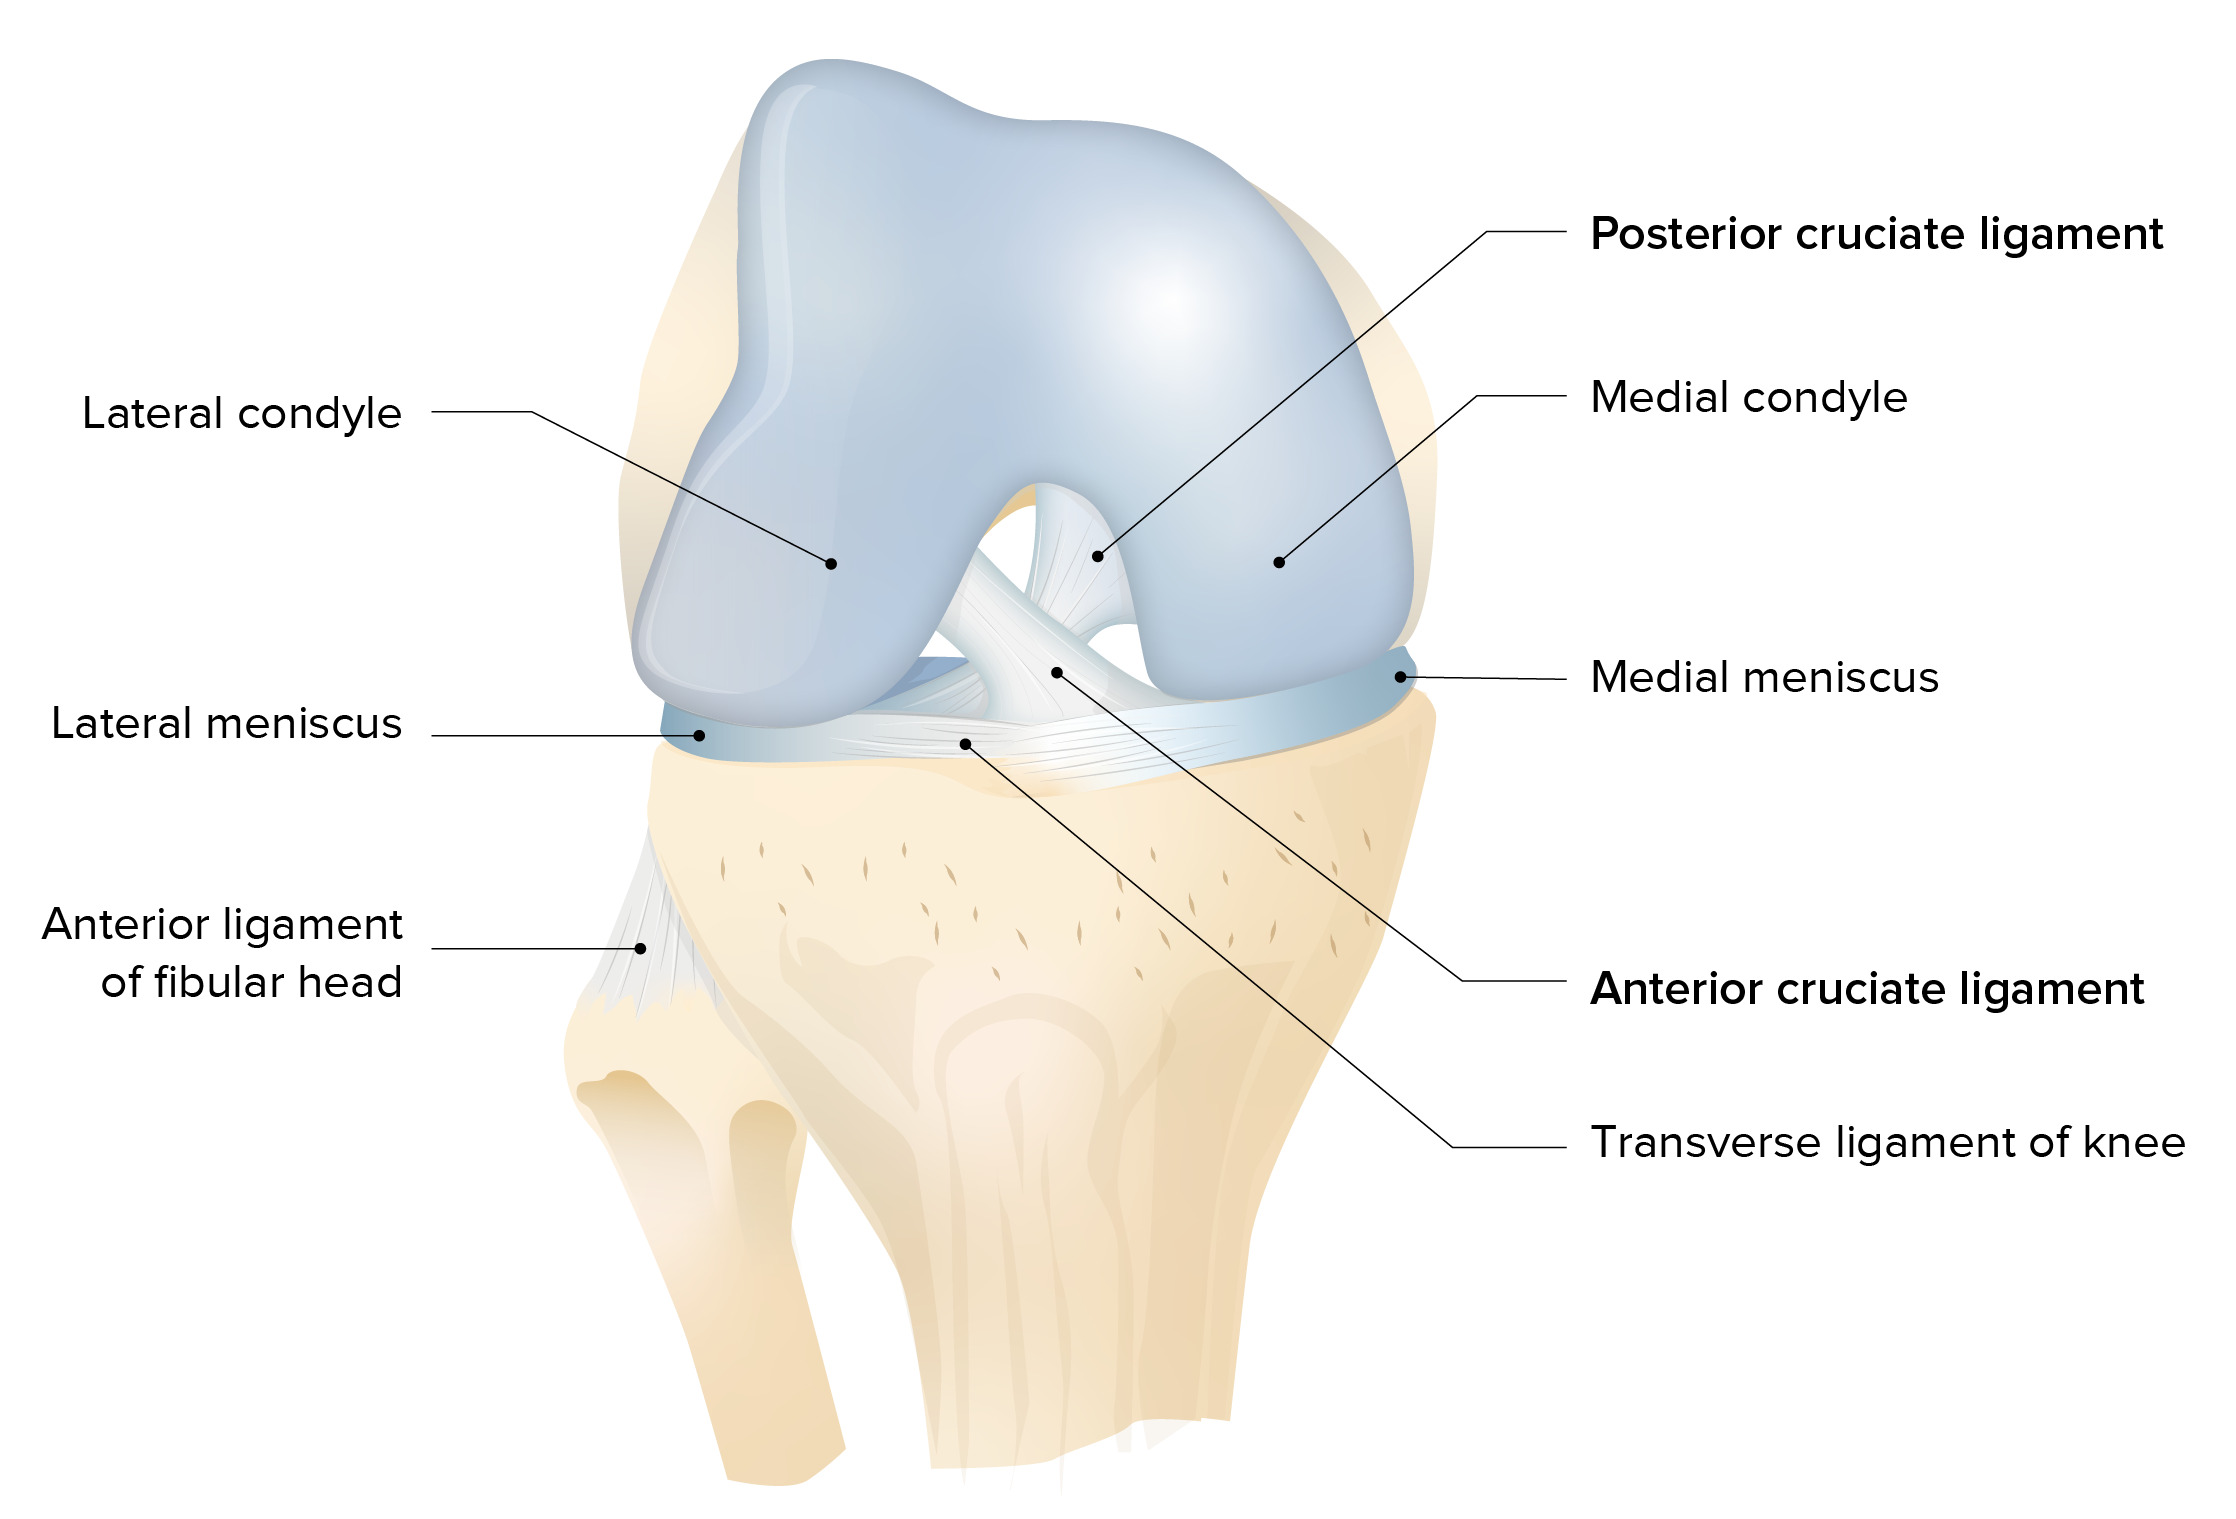 Menisci and articular surfaces of the knee